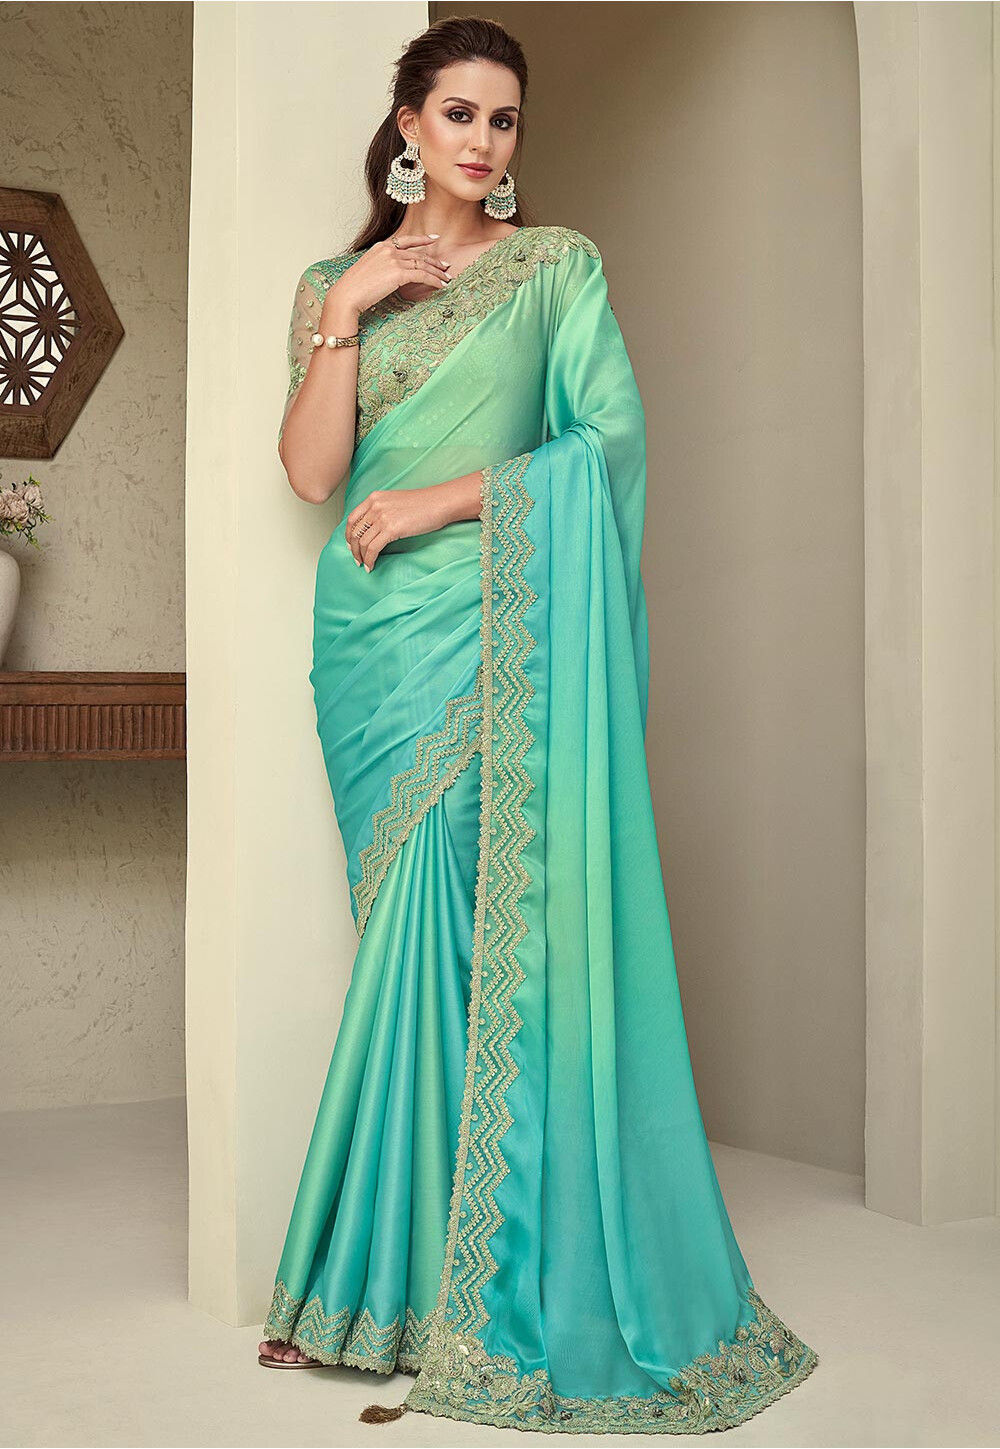 Buy Ombre Satin Georgette Saree in Shaded Sea Green and Light Blue ...